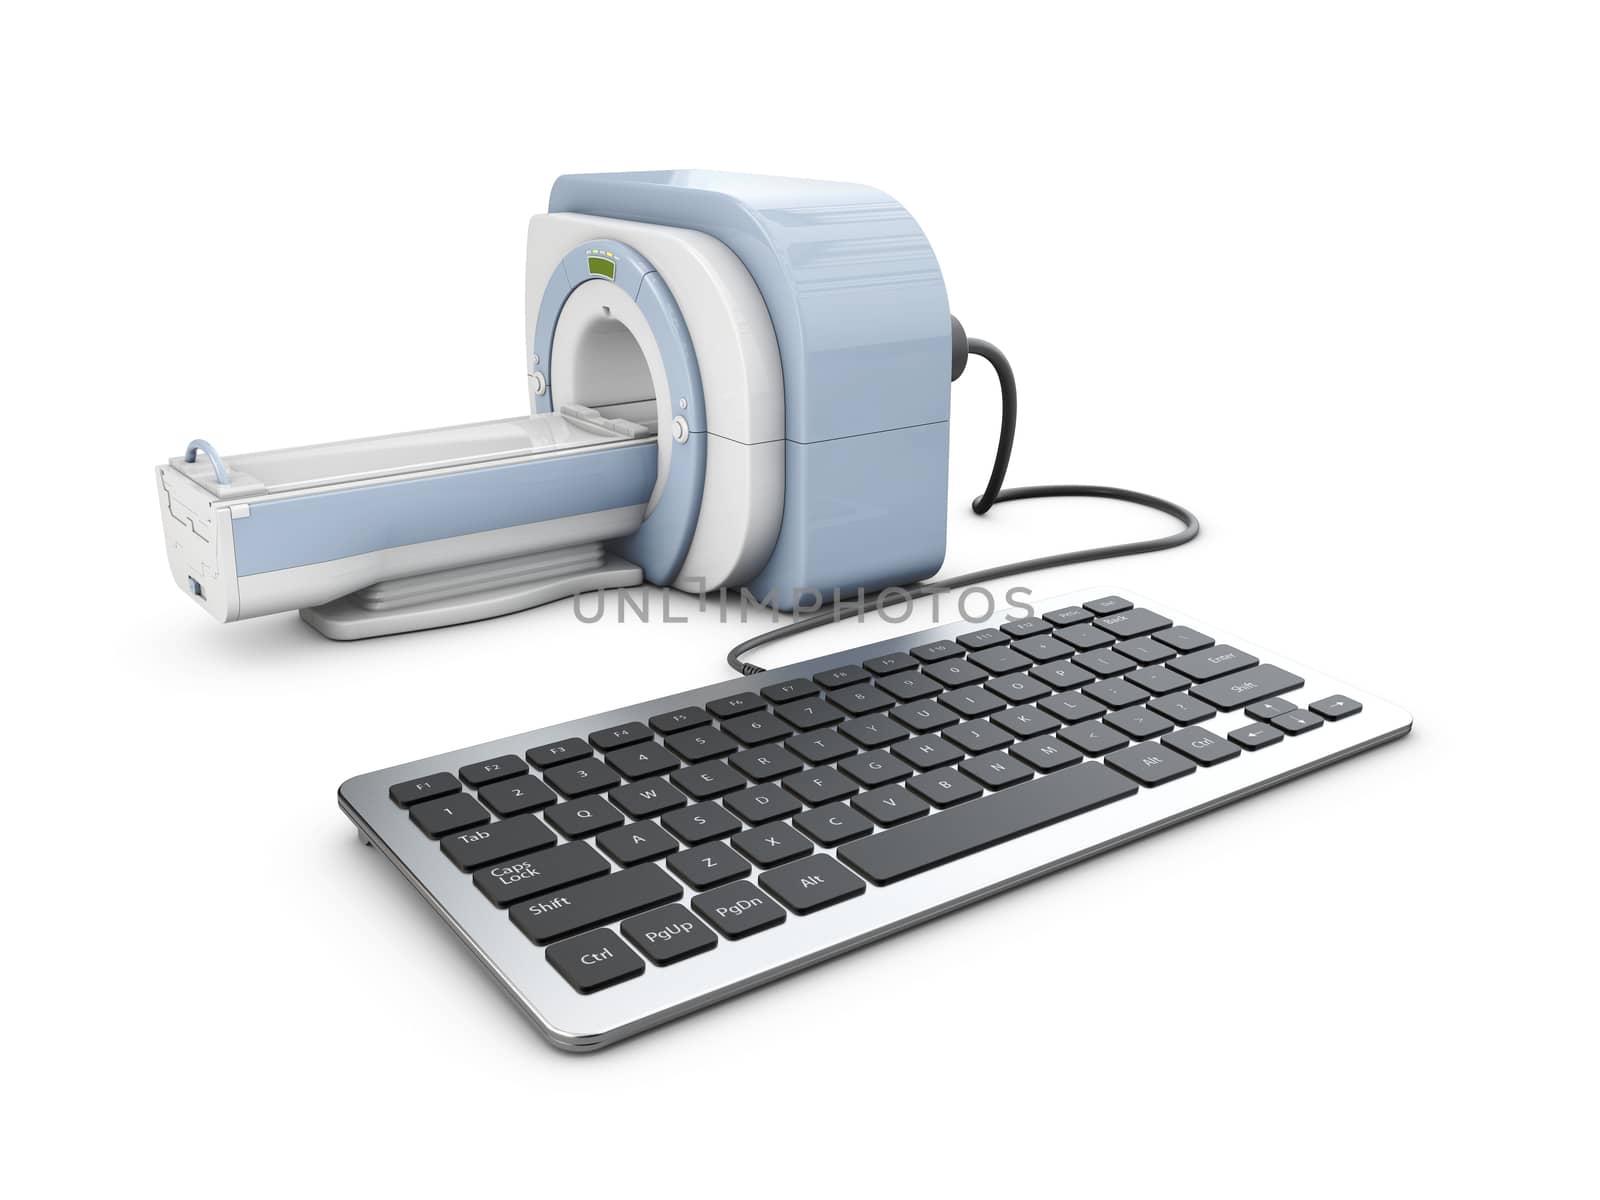 3d illustration of keyboard and magnetic resonance imagingmachine by tussik